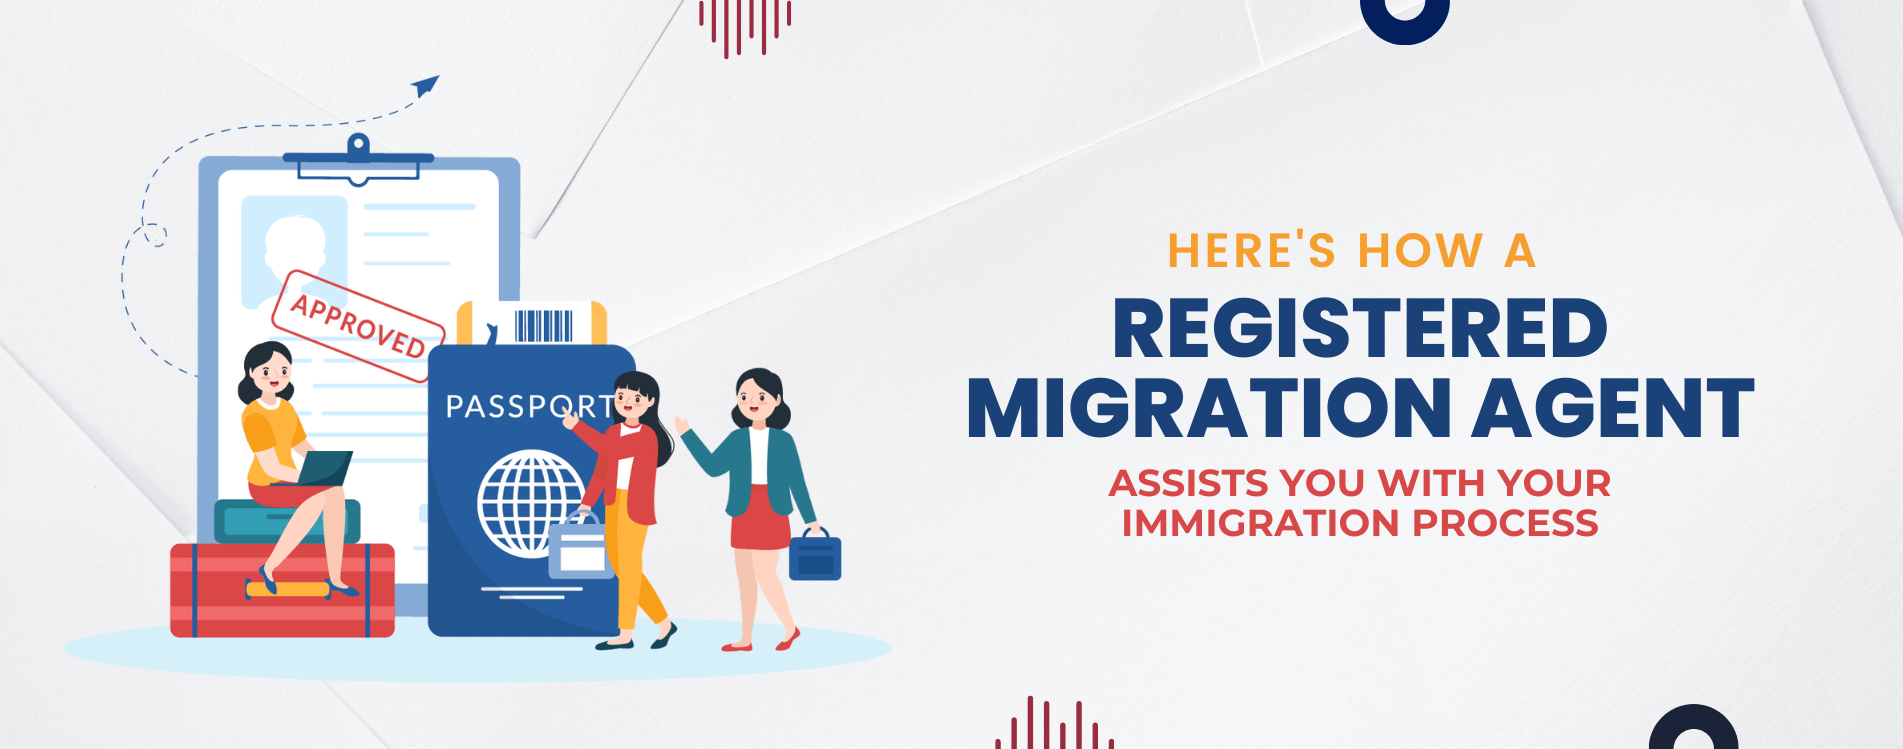 How Can a Registered Migration Agent Assist You with Your Immigration Process?